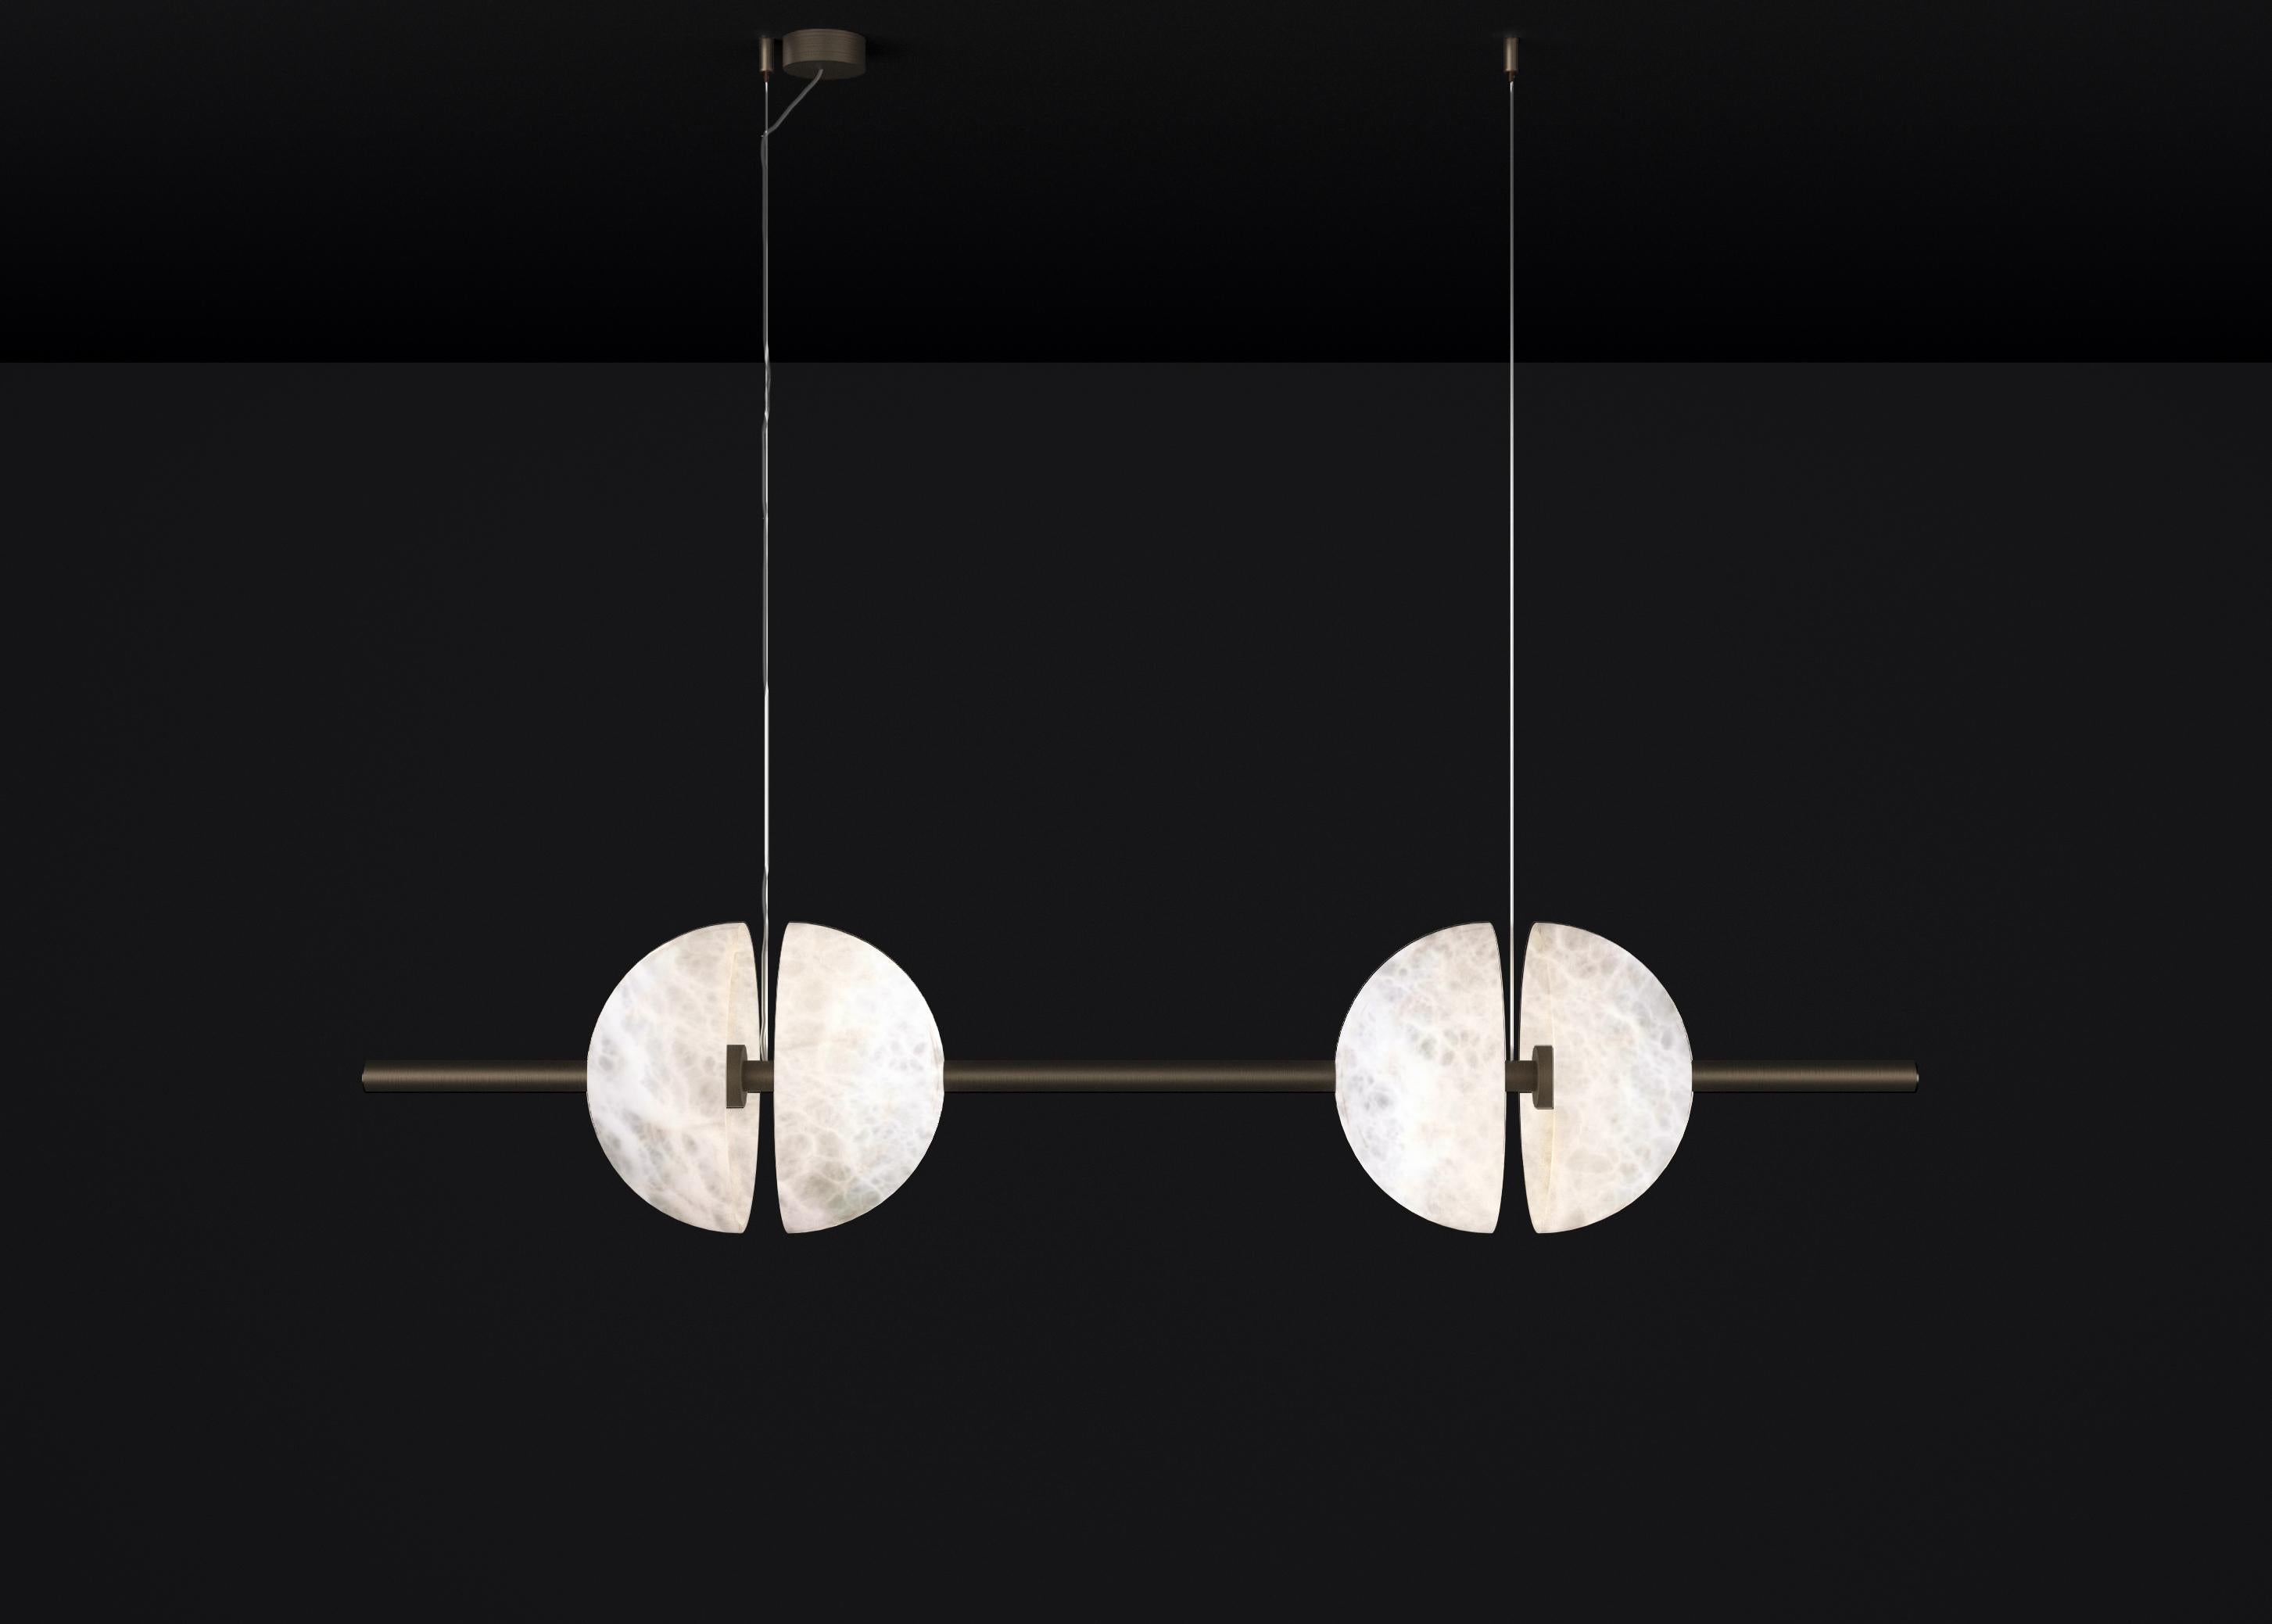 Ermes Burnished Metal And Alabaster Pendant Light 1 by Alabastro Italiano
Dimensions: D 30 x W 150 x H 300 cm.
Materials: White alabaster and brushed burnished metal.

Available in different finishes: Shiny Silver, Bronze, Brushed Brass, Ruggine of